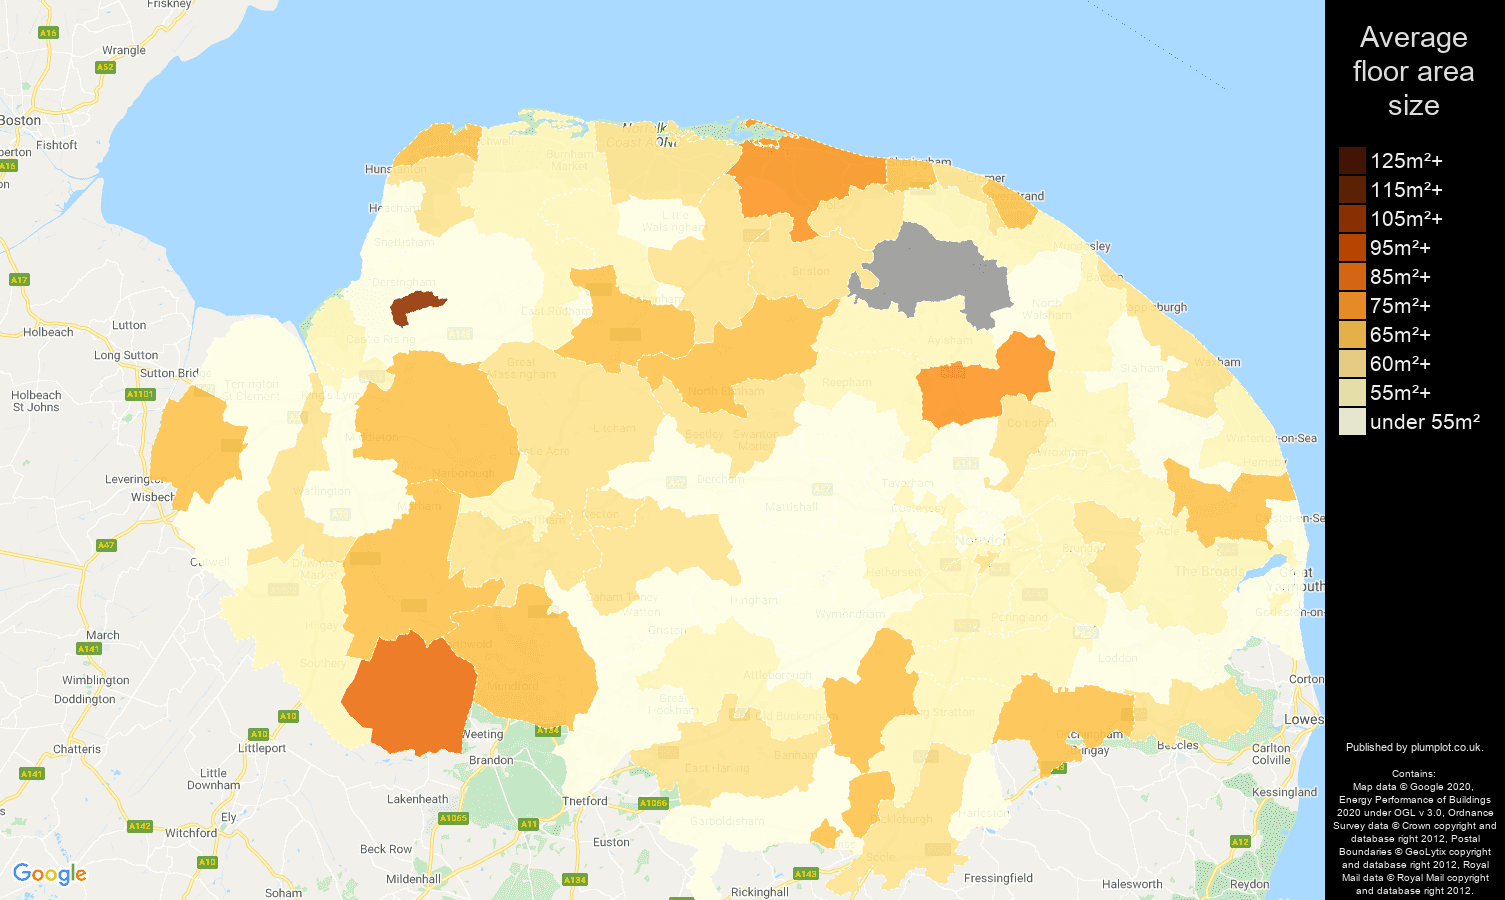 Norfolk map of average floor area size of flats